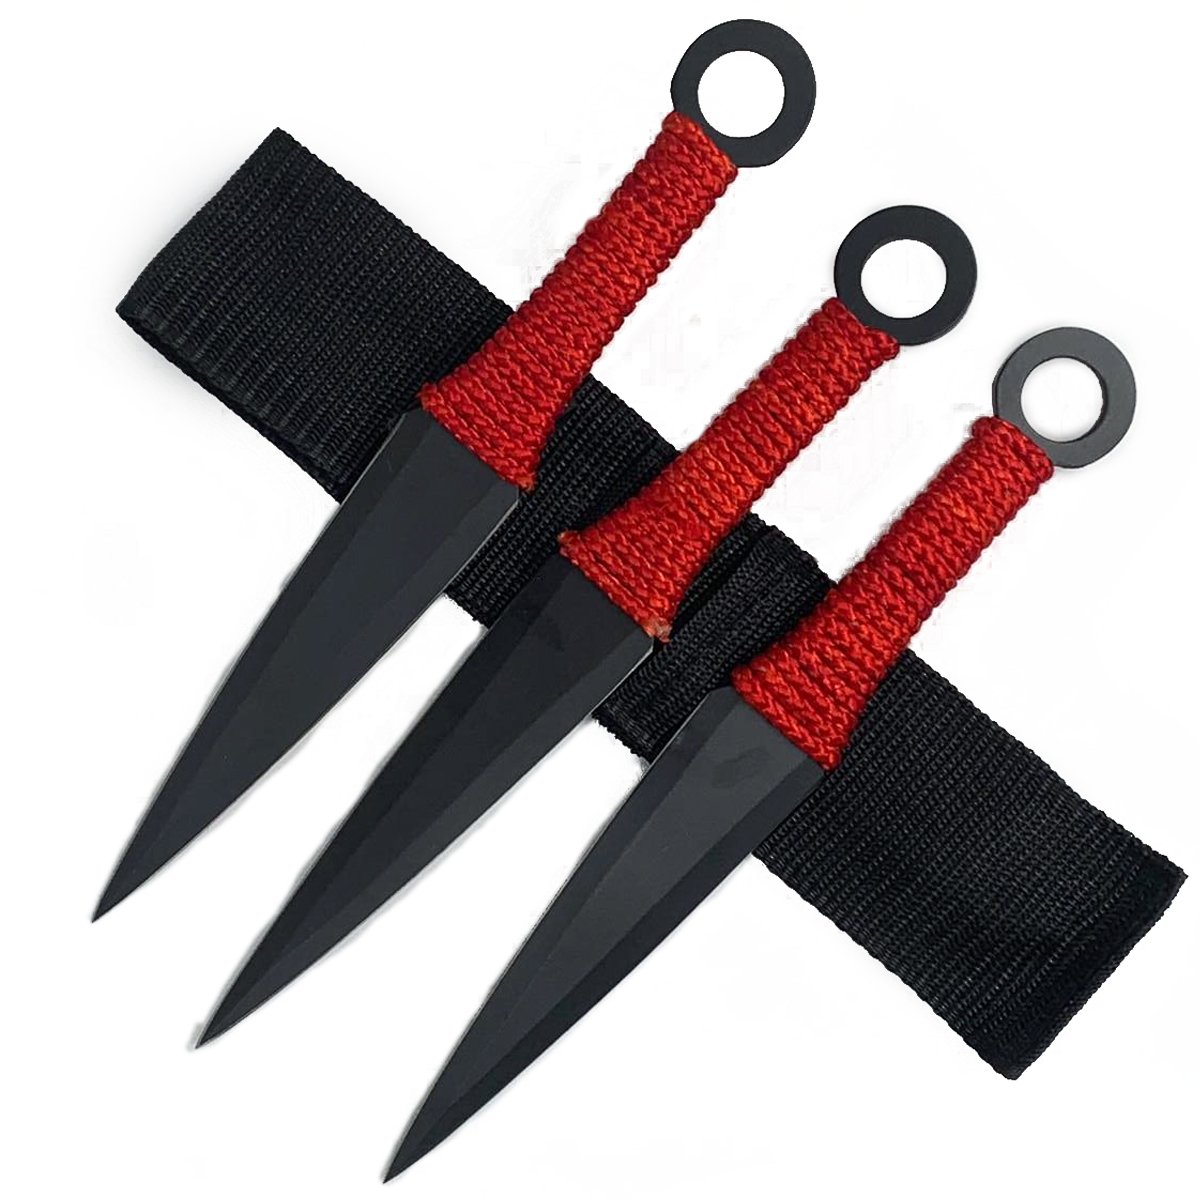 8.5 Inch Throwing Knife Set Set of 3 Black with Red Paracord Handle